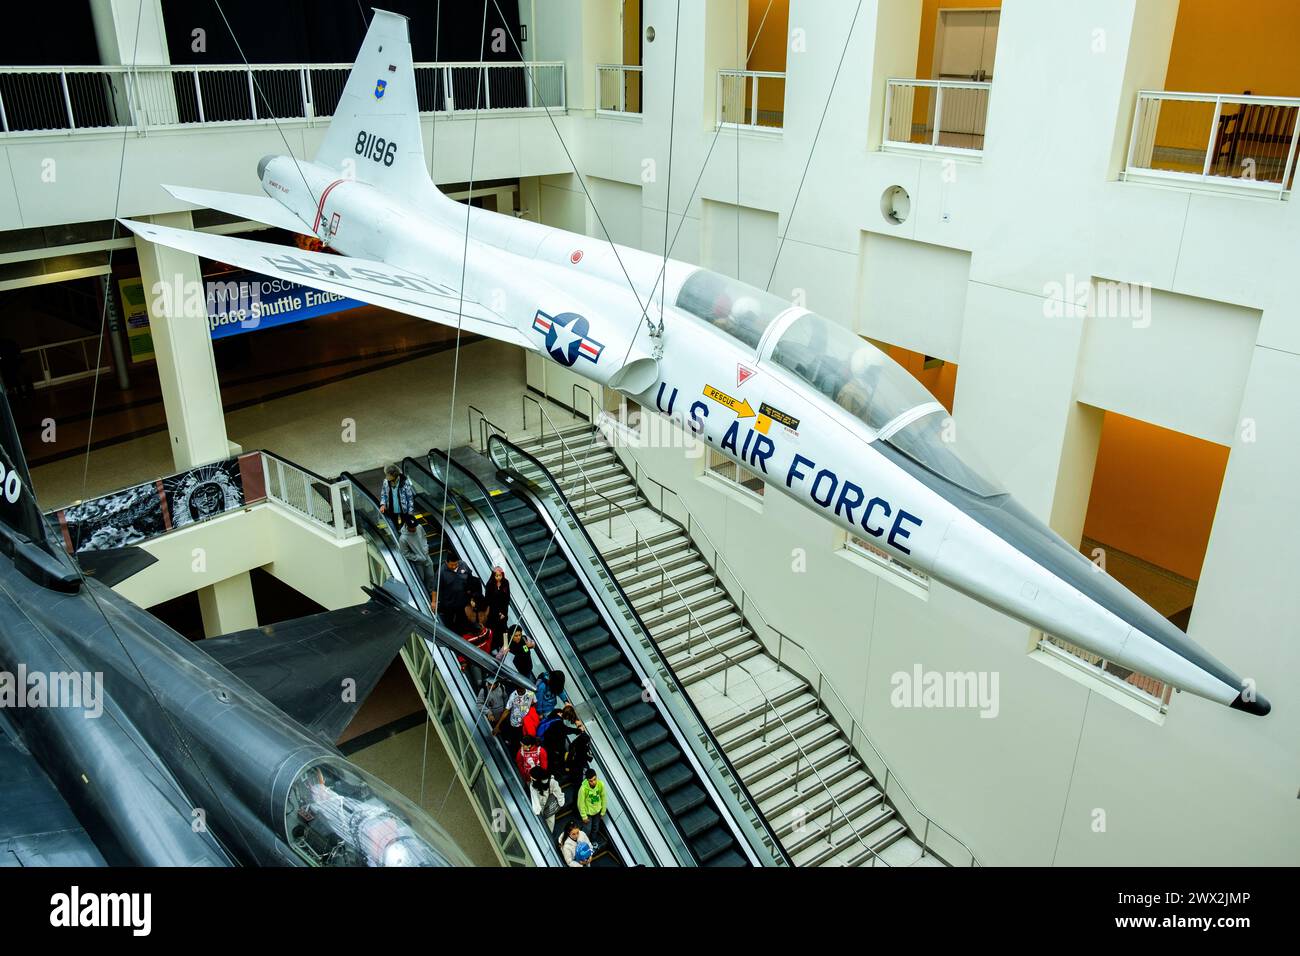 Northrop T-38 Talon (white), first twin-engine, high-altitude supersonic jet trainer, seen at the California Science Center, Los Angeles, California. Stock Photo